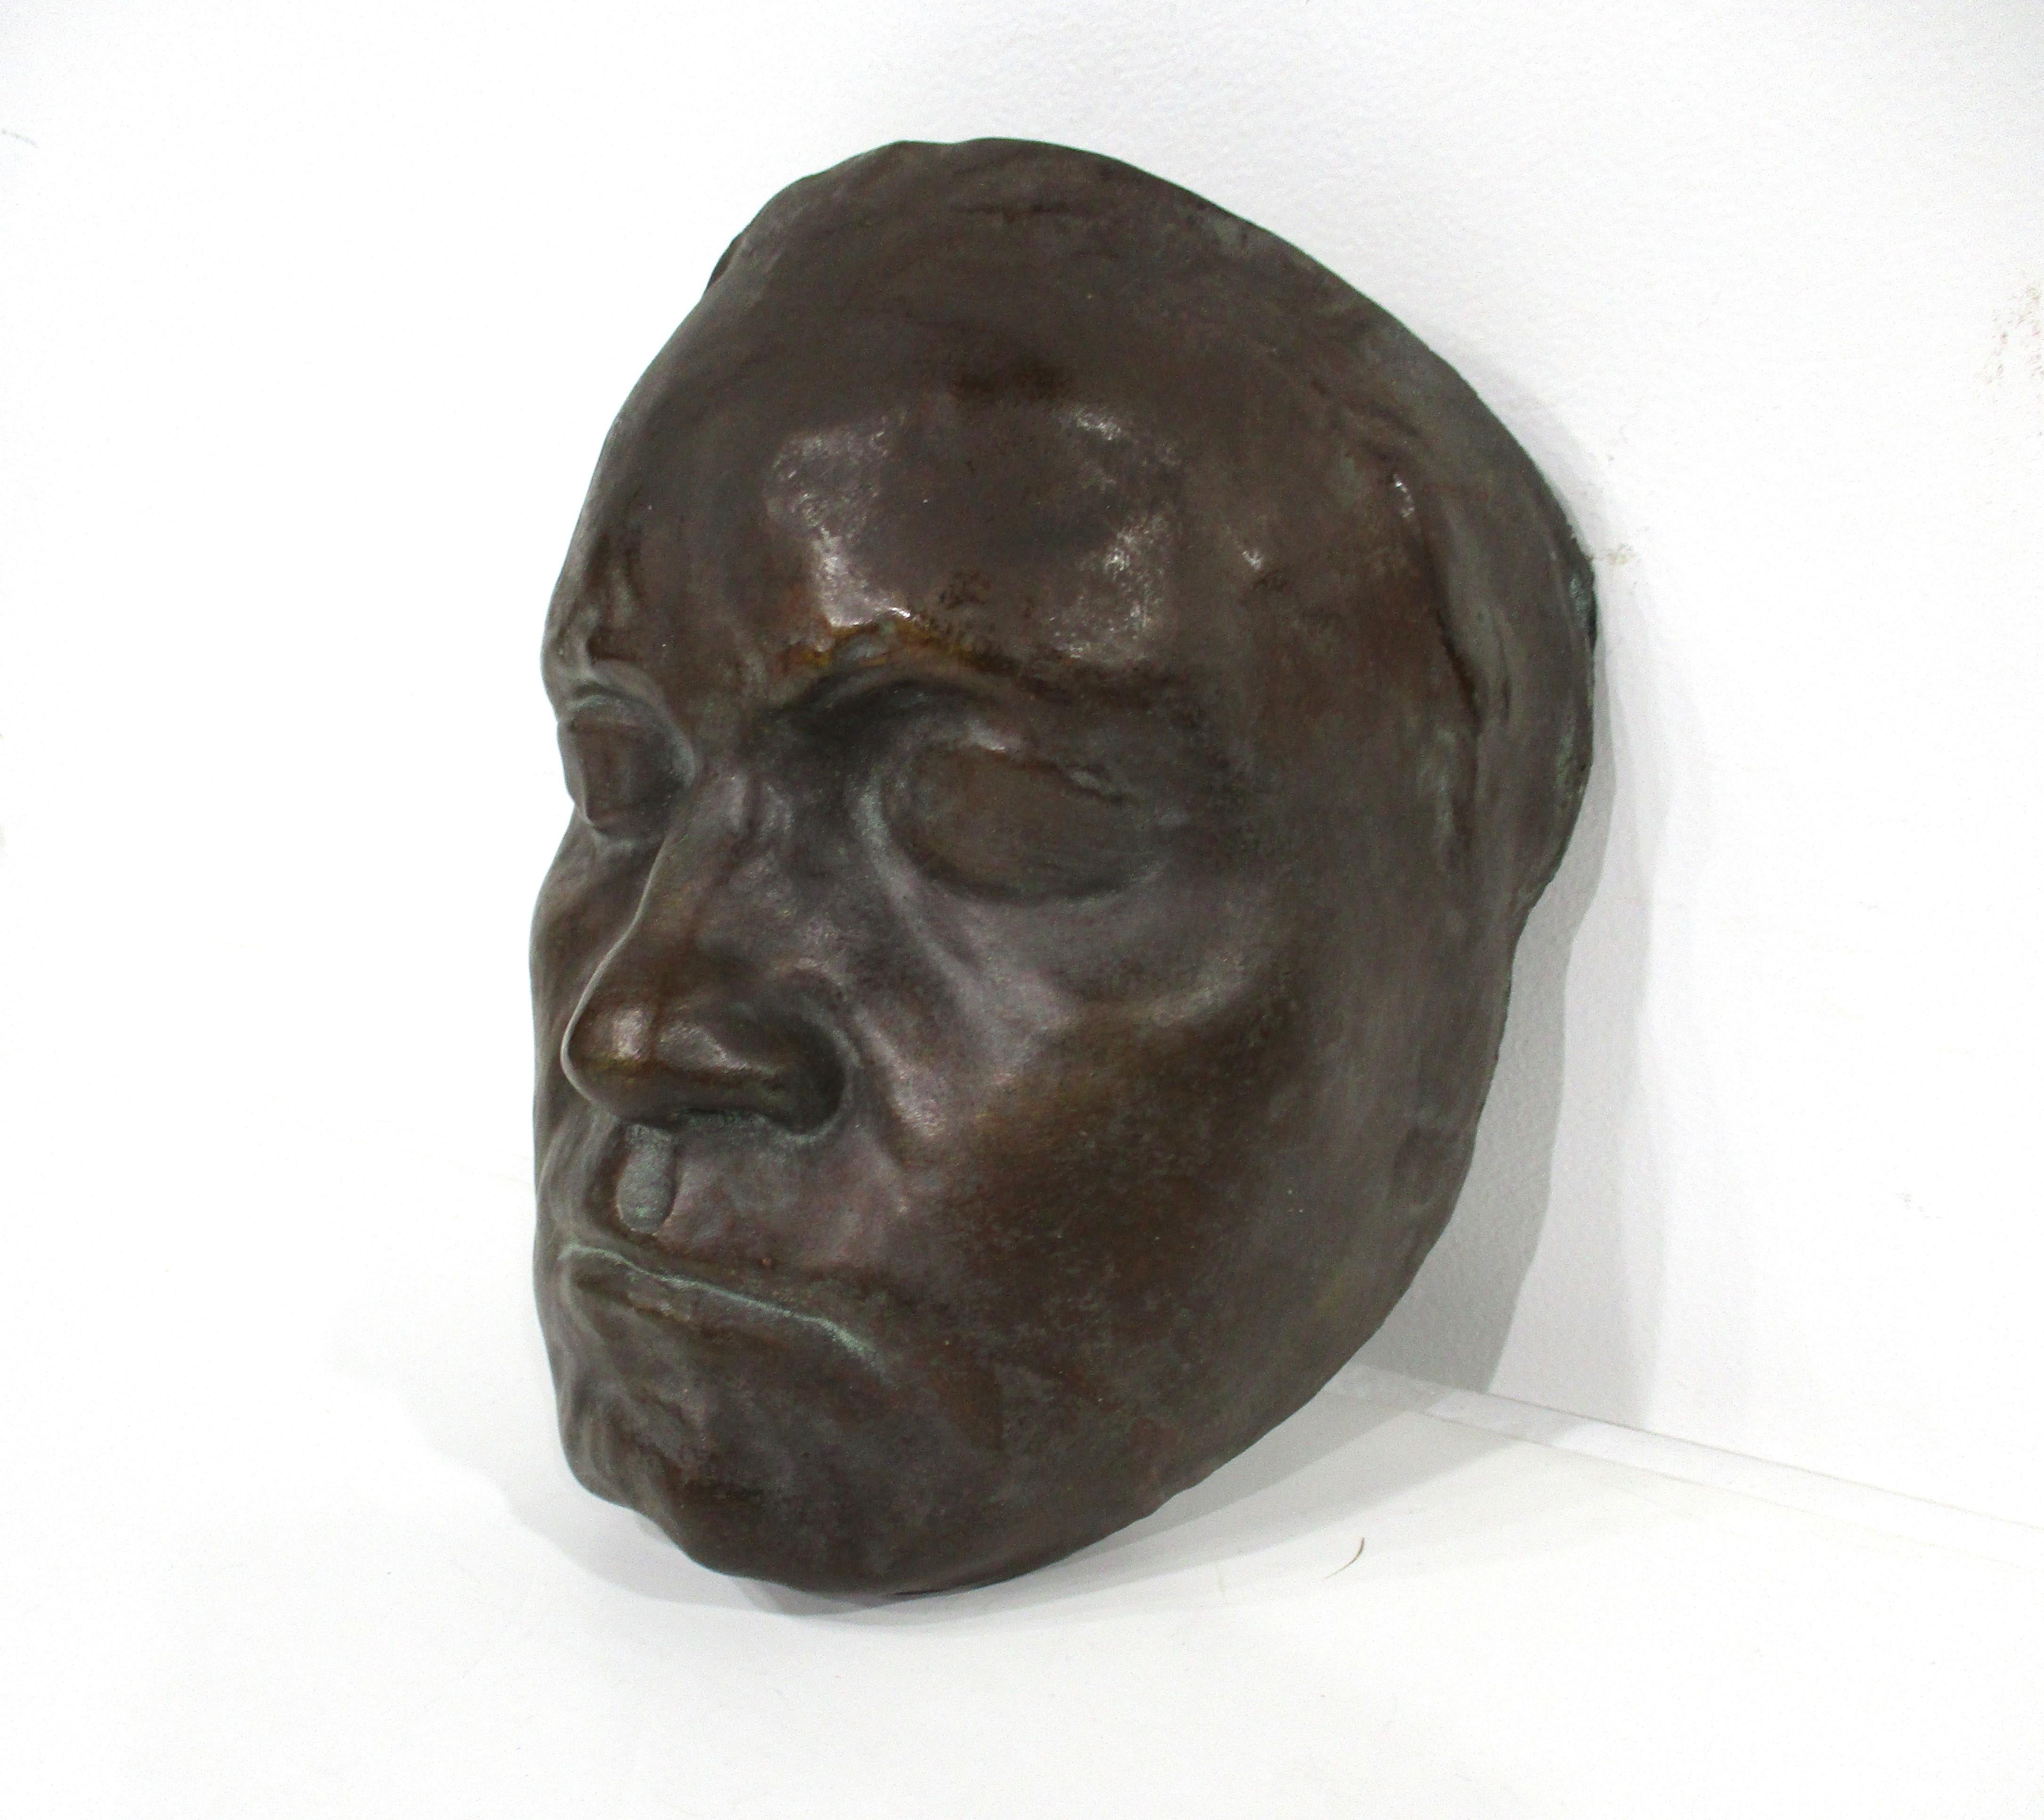 A plaster cast mask with great strong details of a male face with a pottery styled glaze in the manner of bronze which is very realistic . This could be a so called death mask which was popular in the early 1900's to the later 1940's having a molded